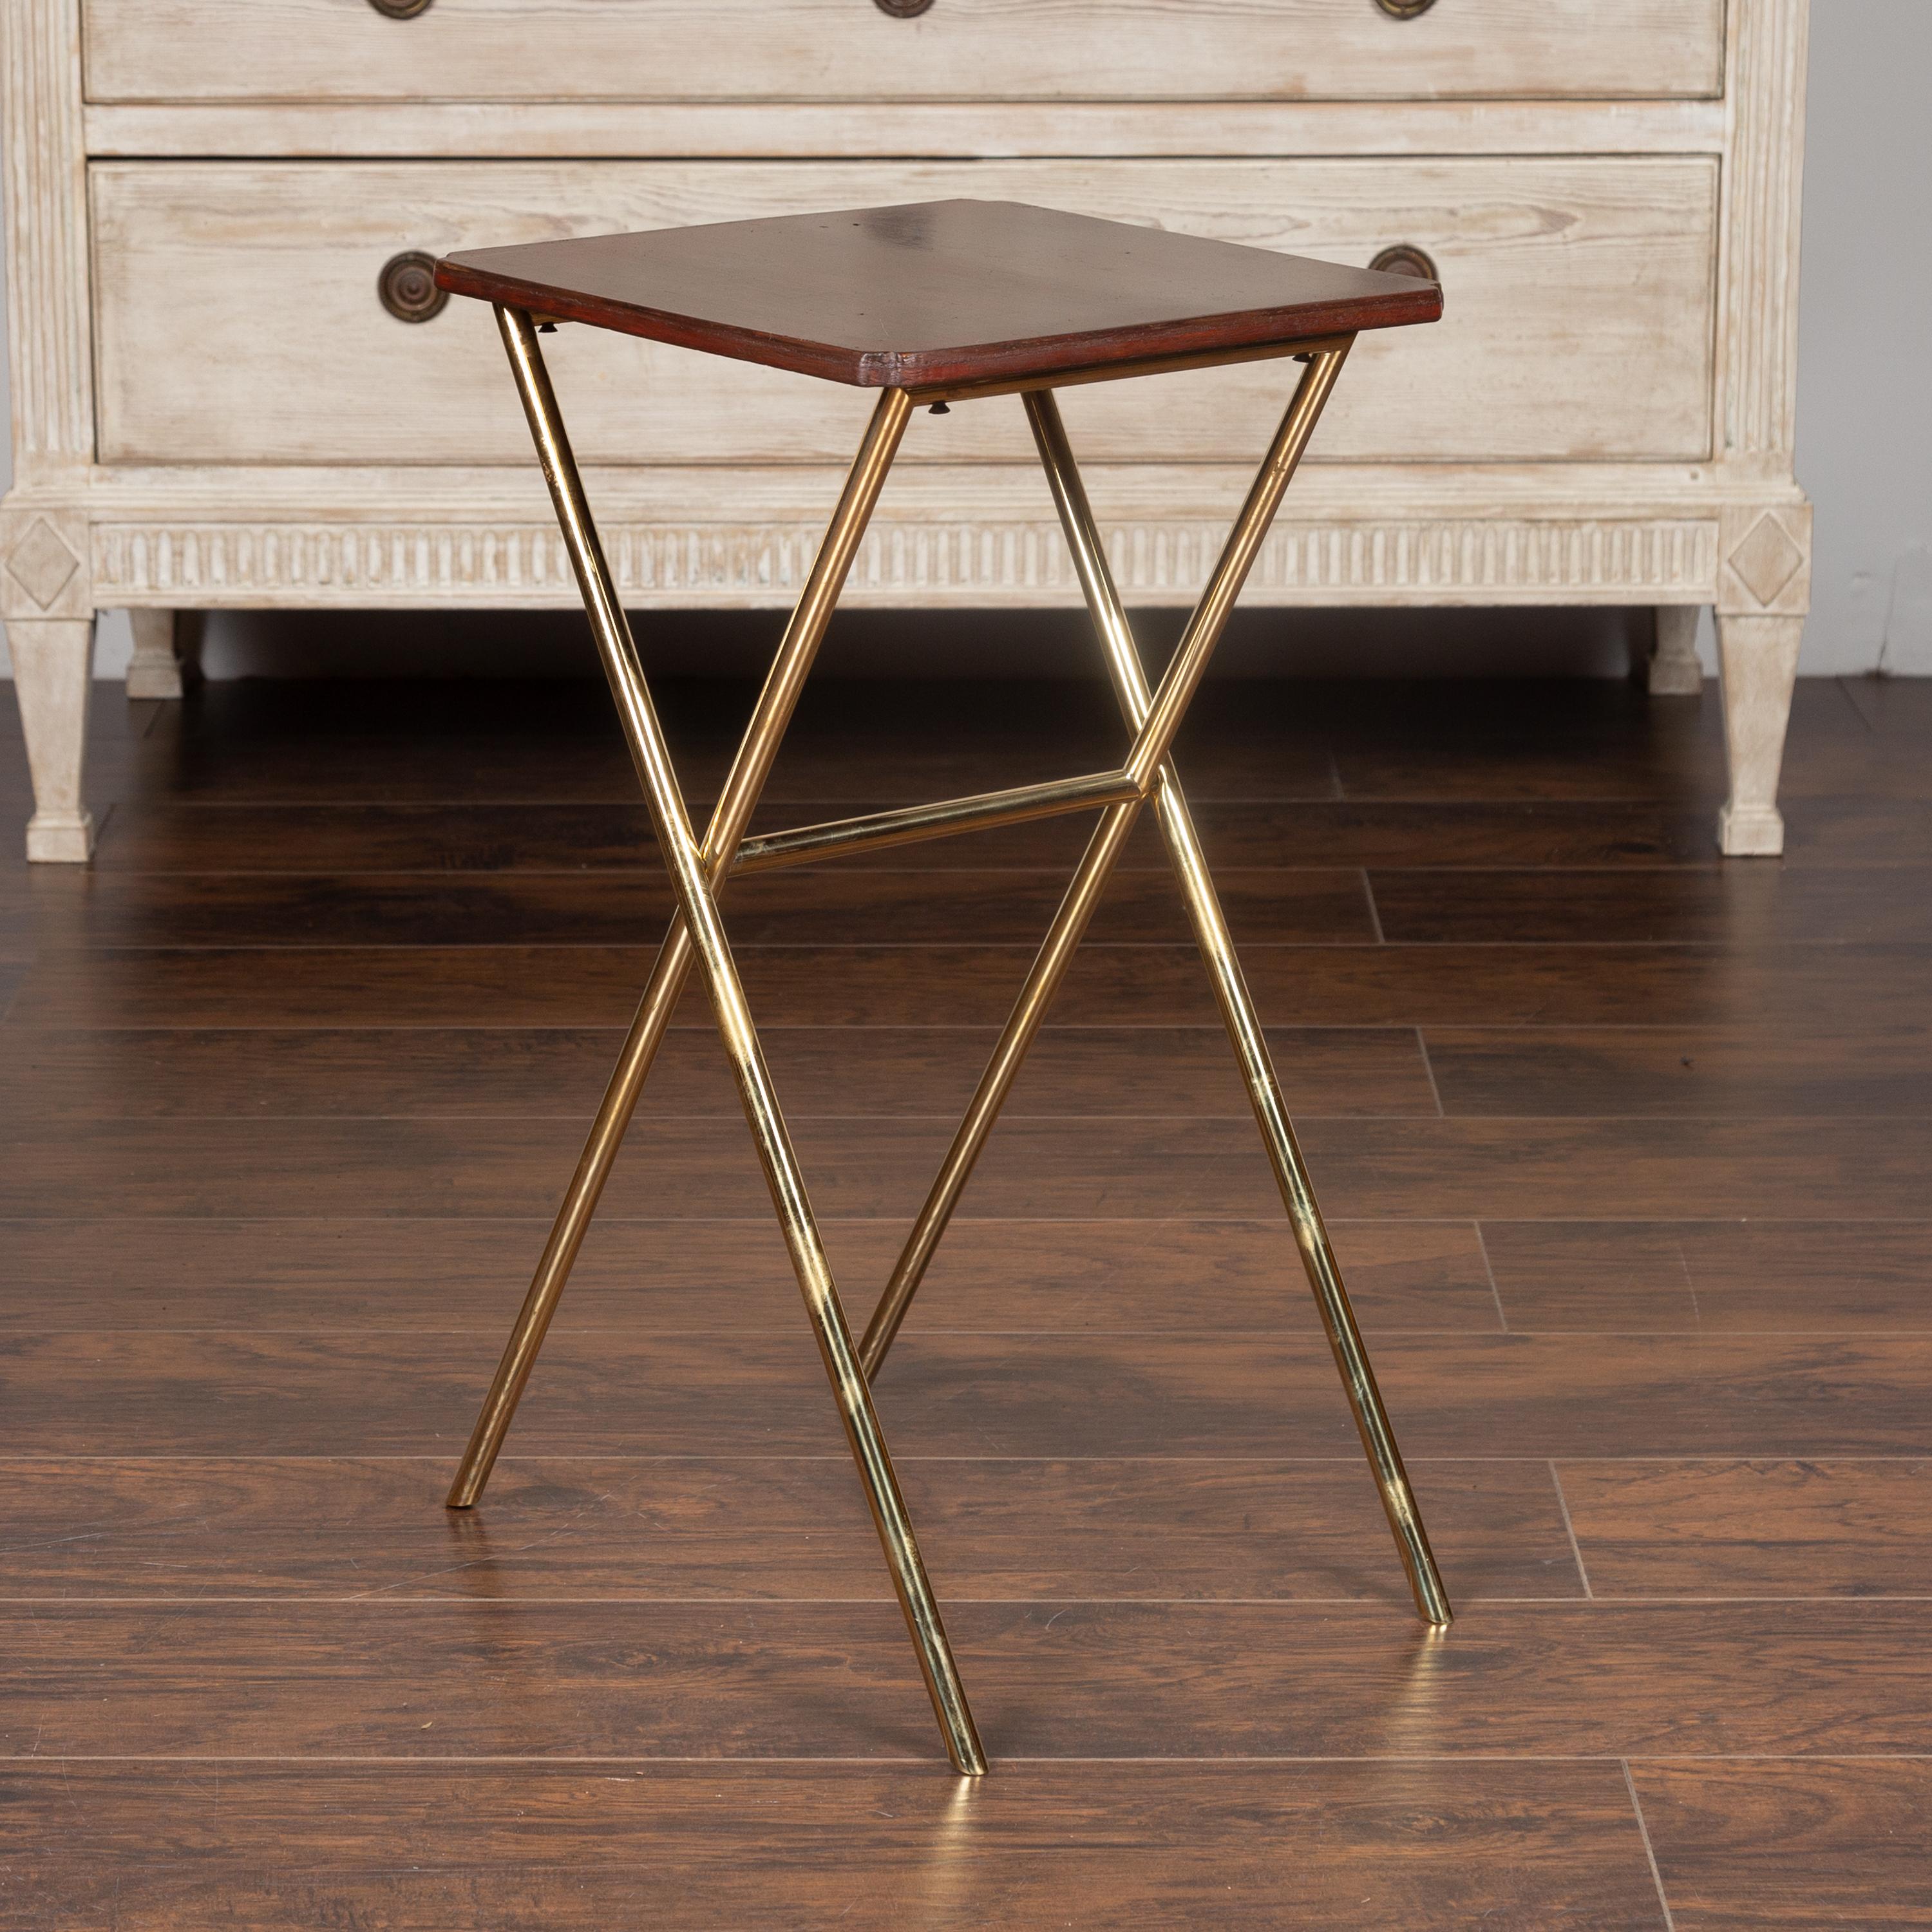 A vintage English chinoiserie lacquered side table from the mid-20th century, with brass base. Born in England during the midcentury period, this elegant side table features a lacquered top adorned with a lovely chinoiserie décor, resting on a